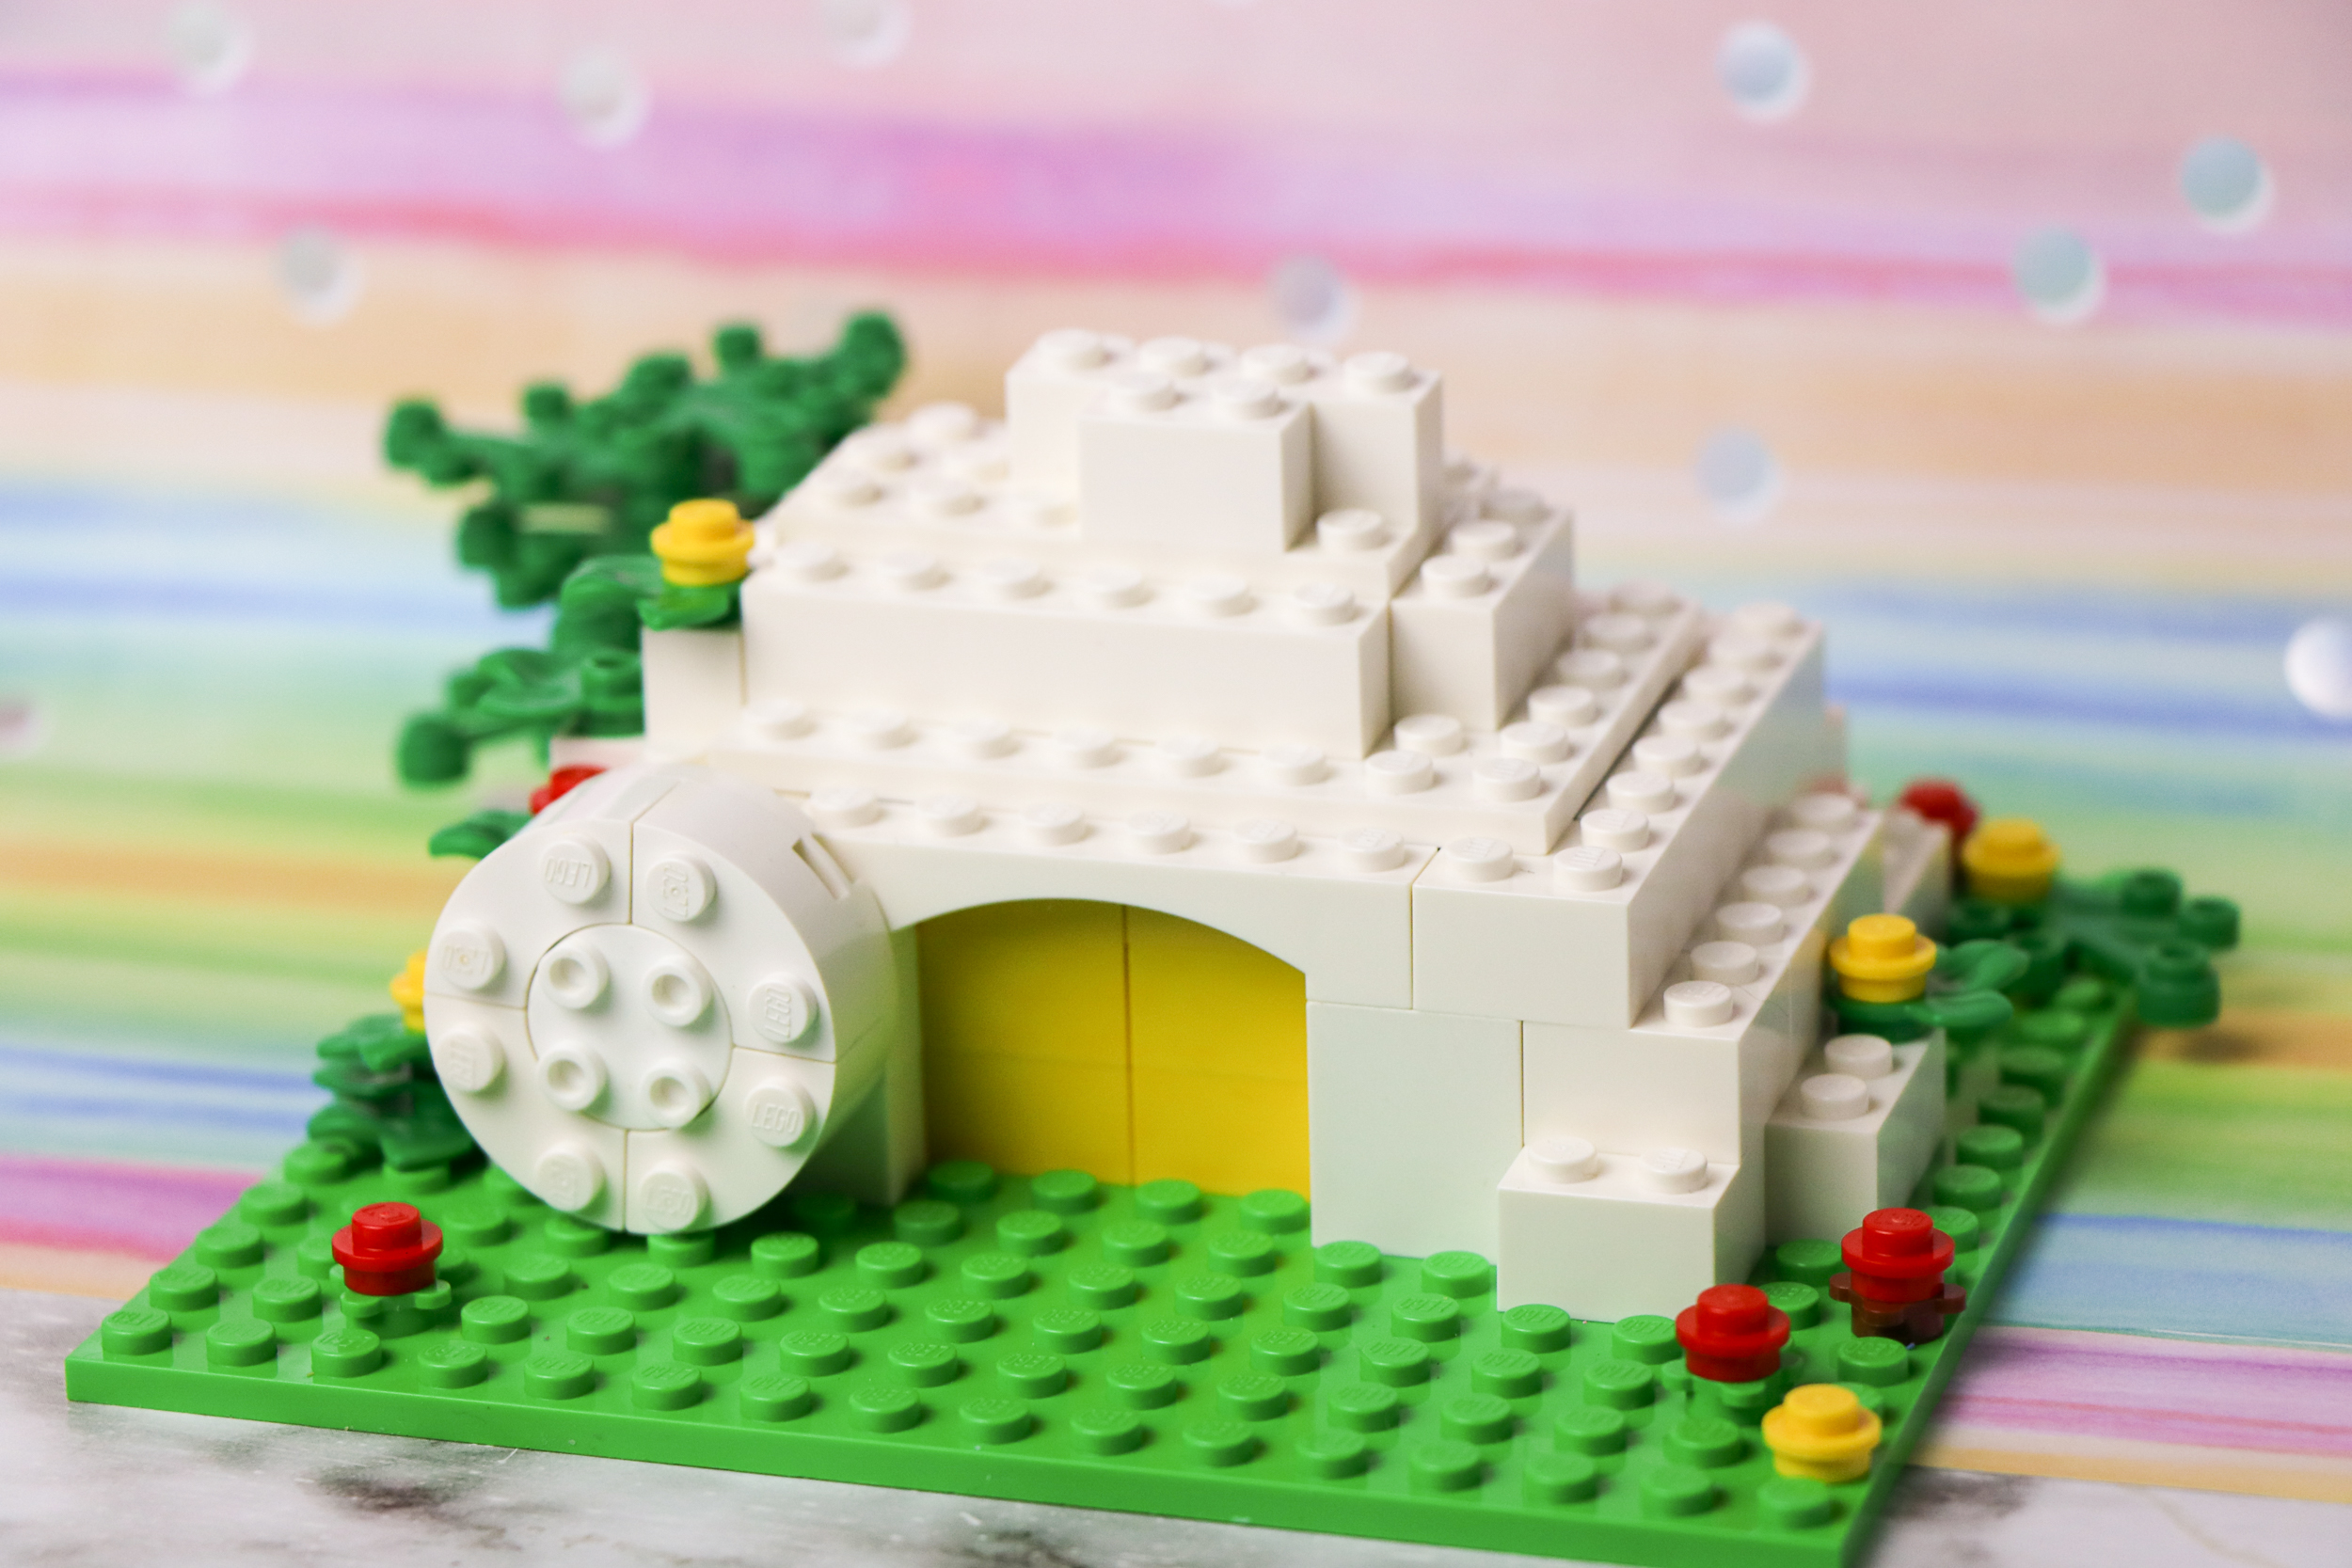 Easter Legos – Build a Lego Easter Tomb